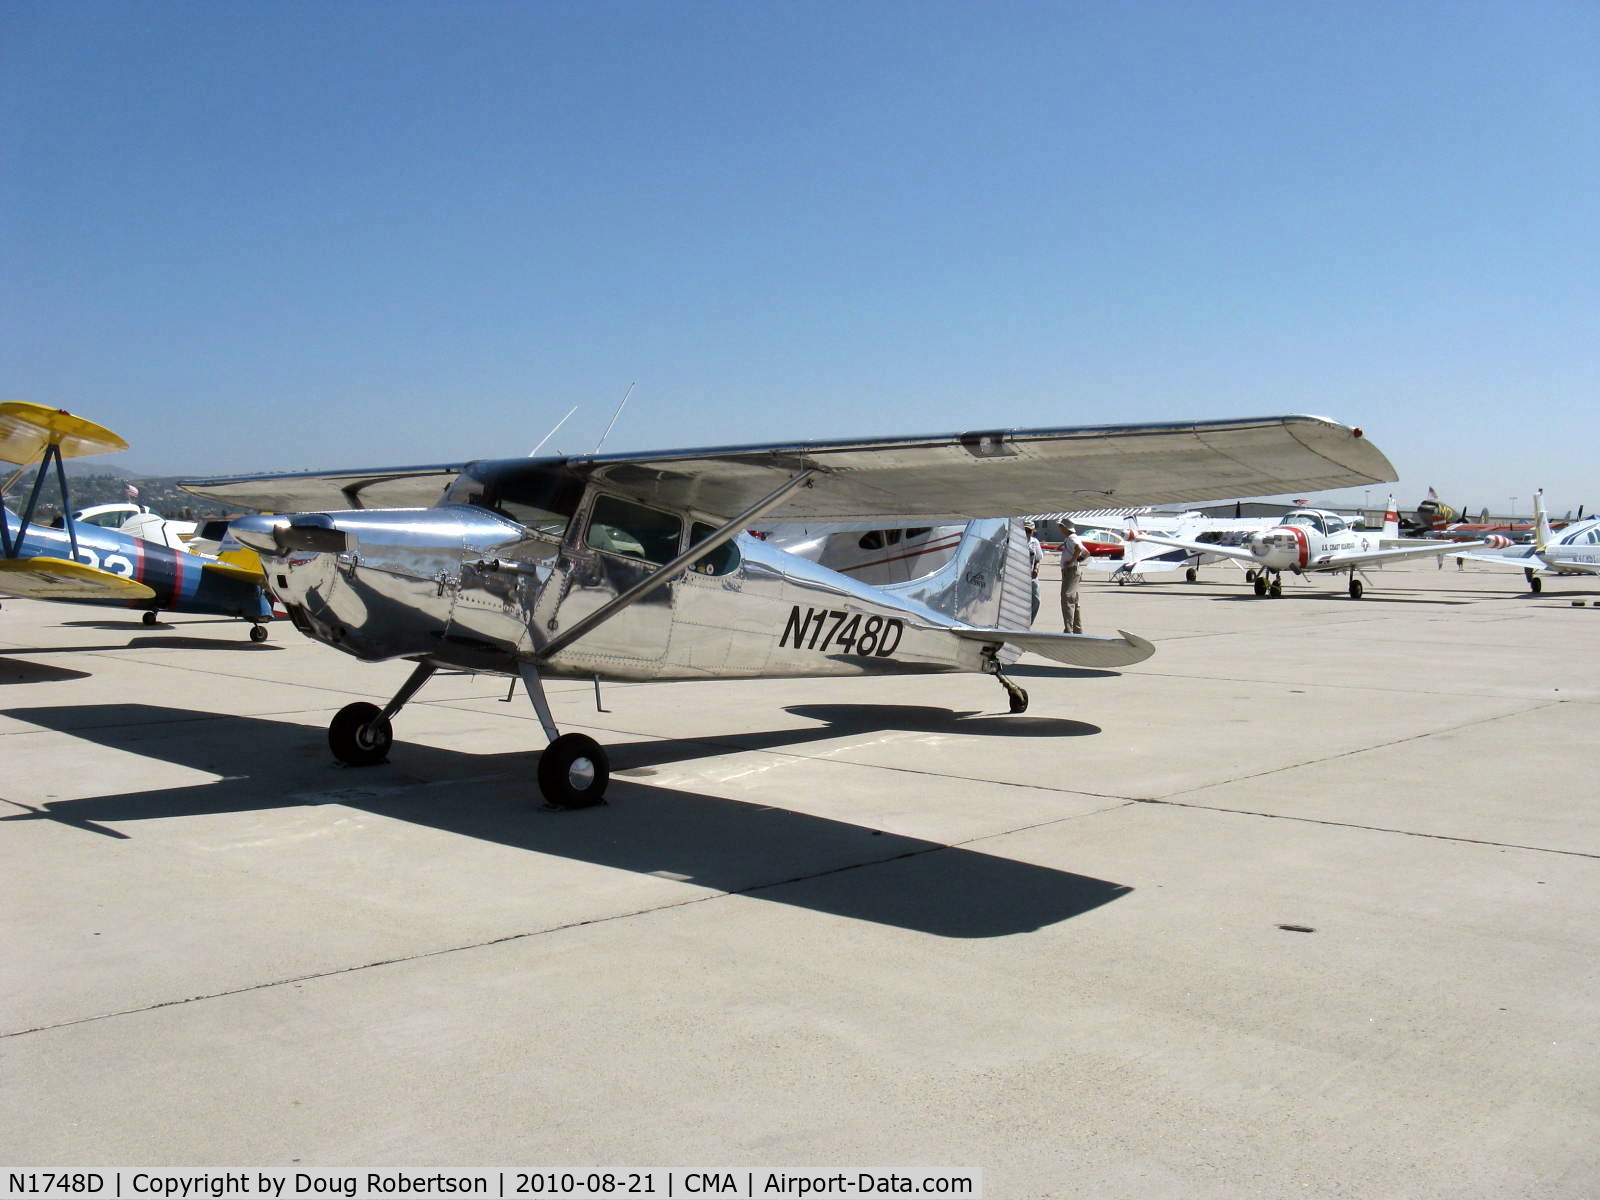 N1748D, 1951 Cessna 170A C/N 20191, 1951 Cessna 170A, Continental C145 145 Hp, highly polished